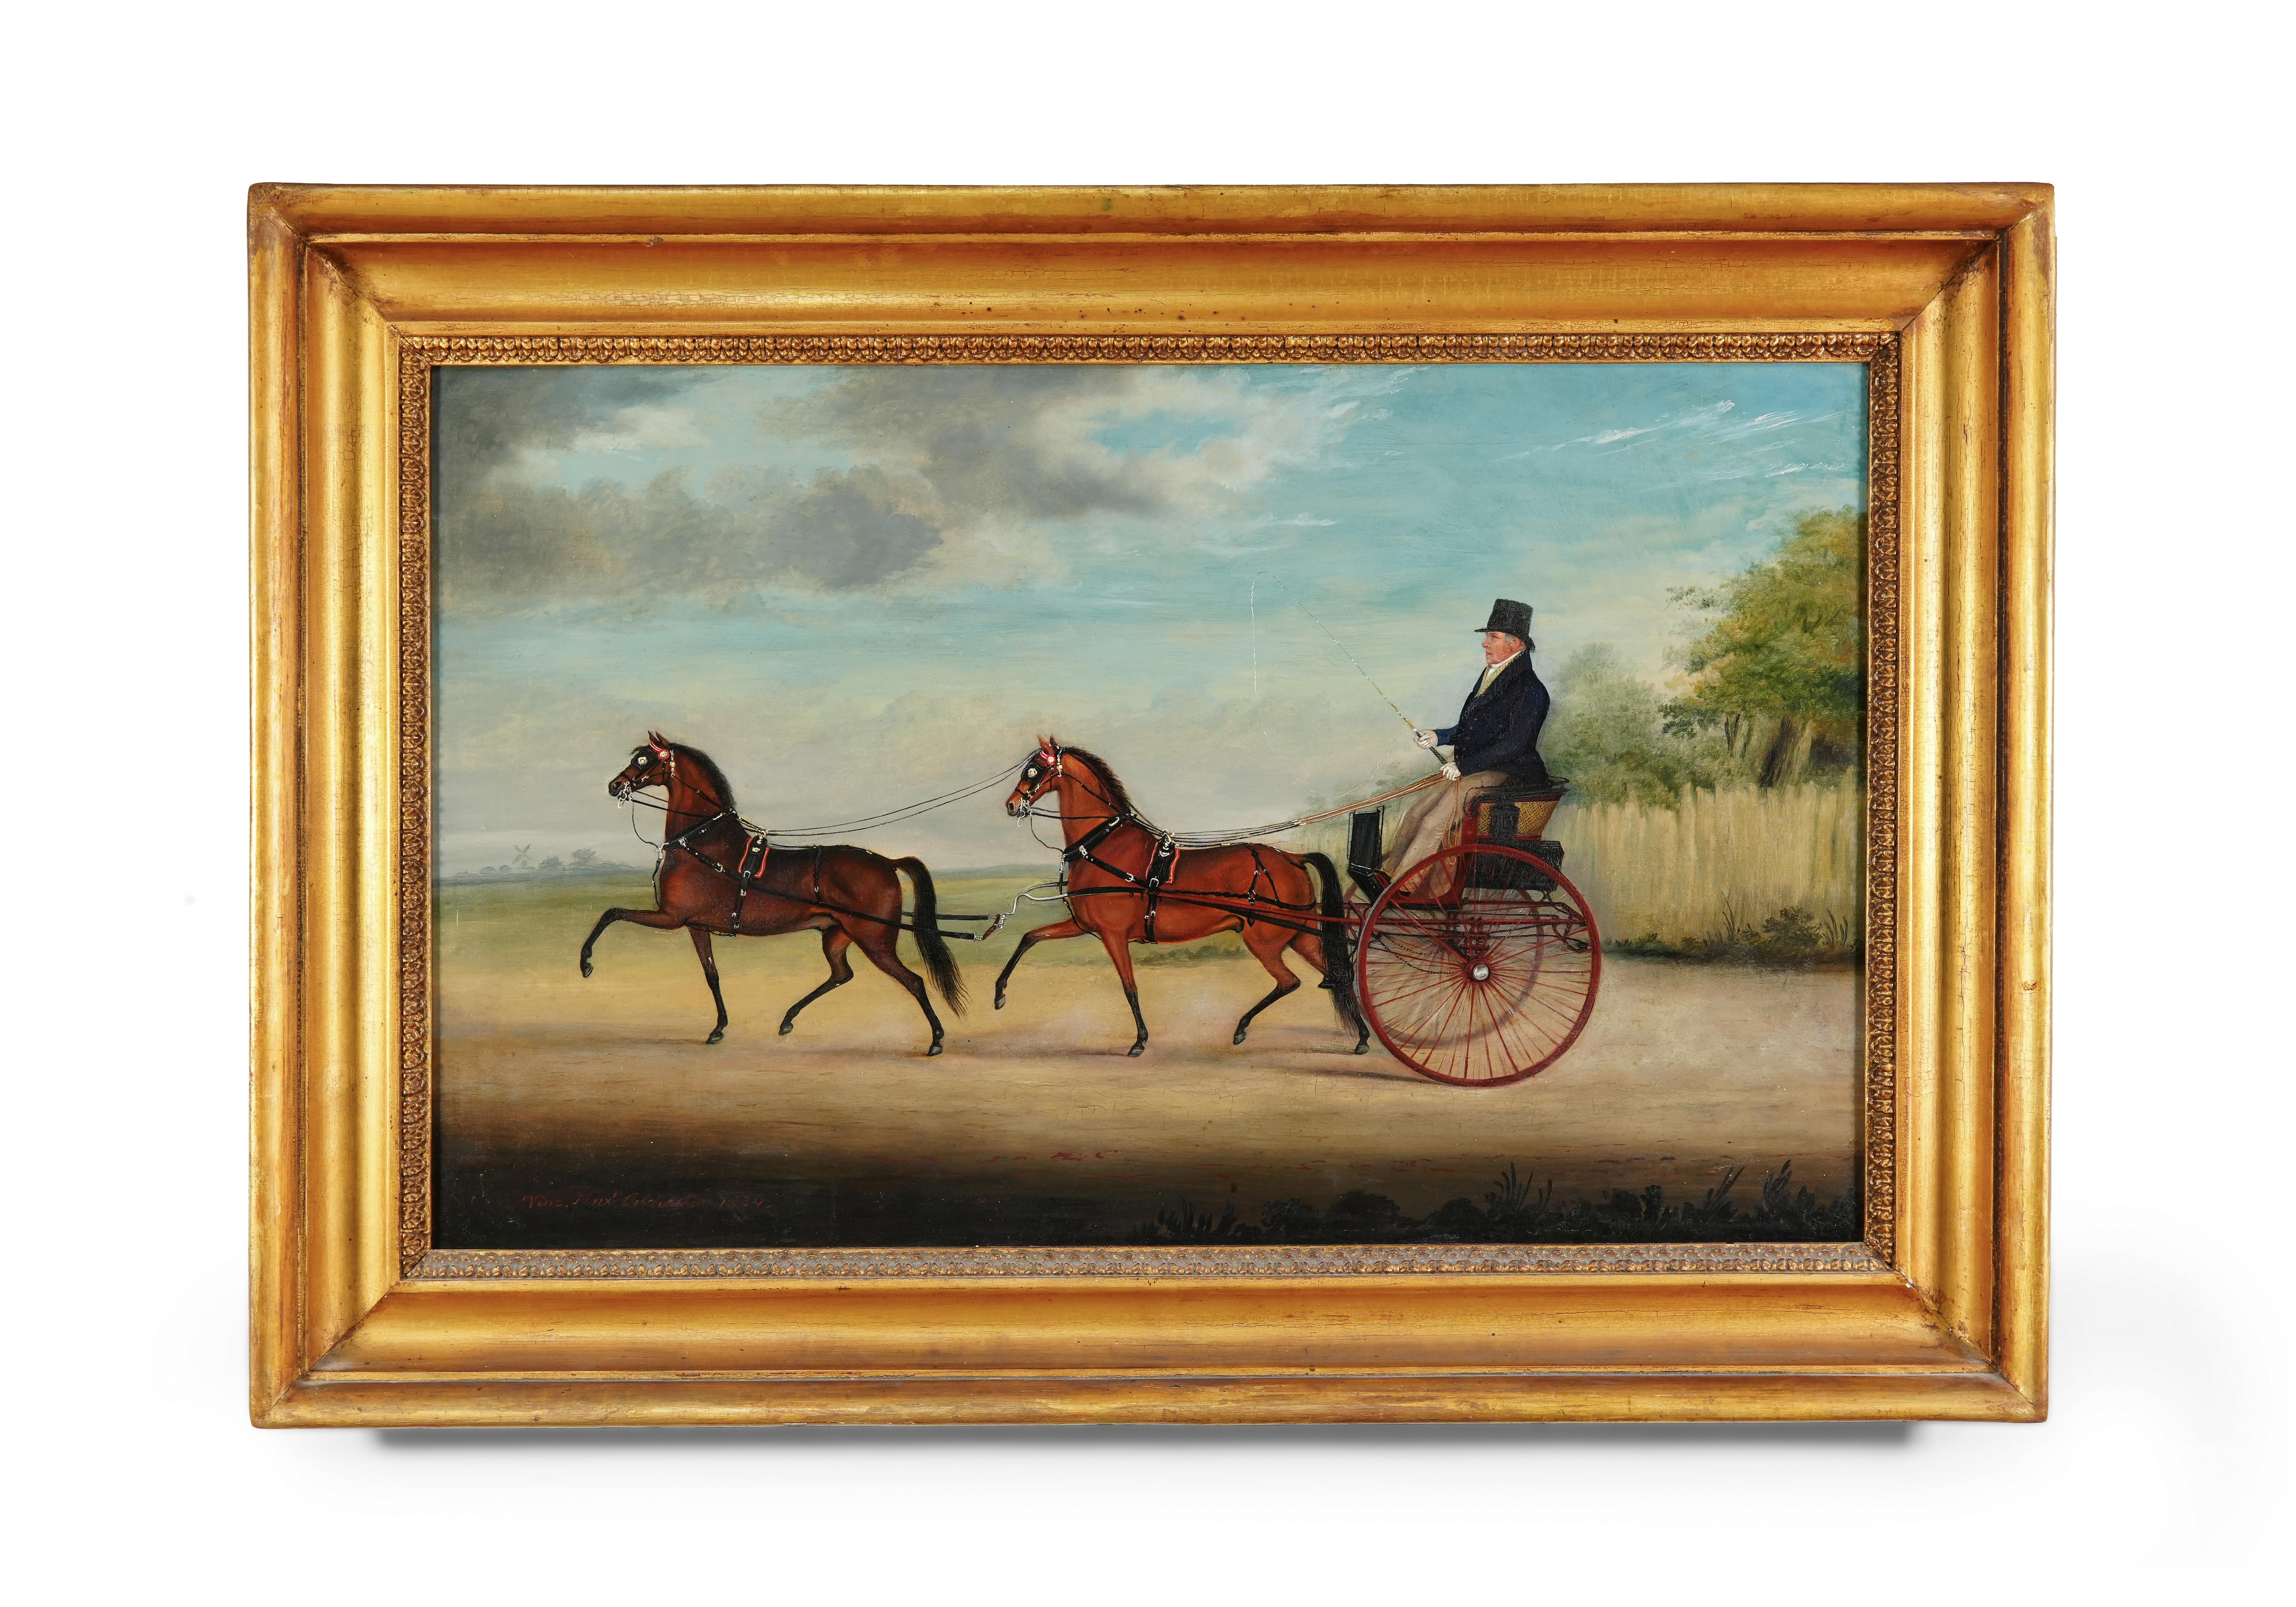 john vine of colchester Animal Painting - horse & carriage/gig , country scene, antique oil, by John Vine of Colchester